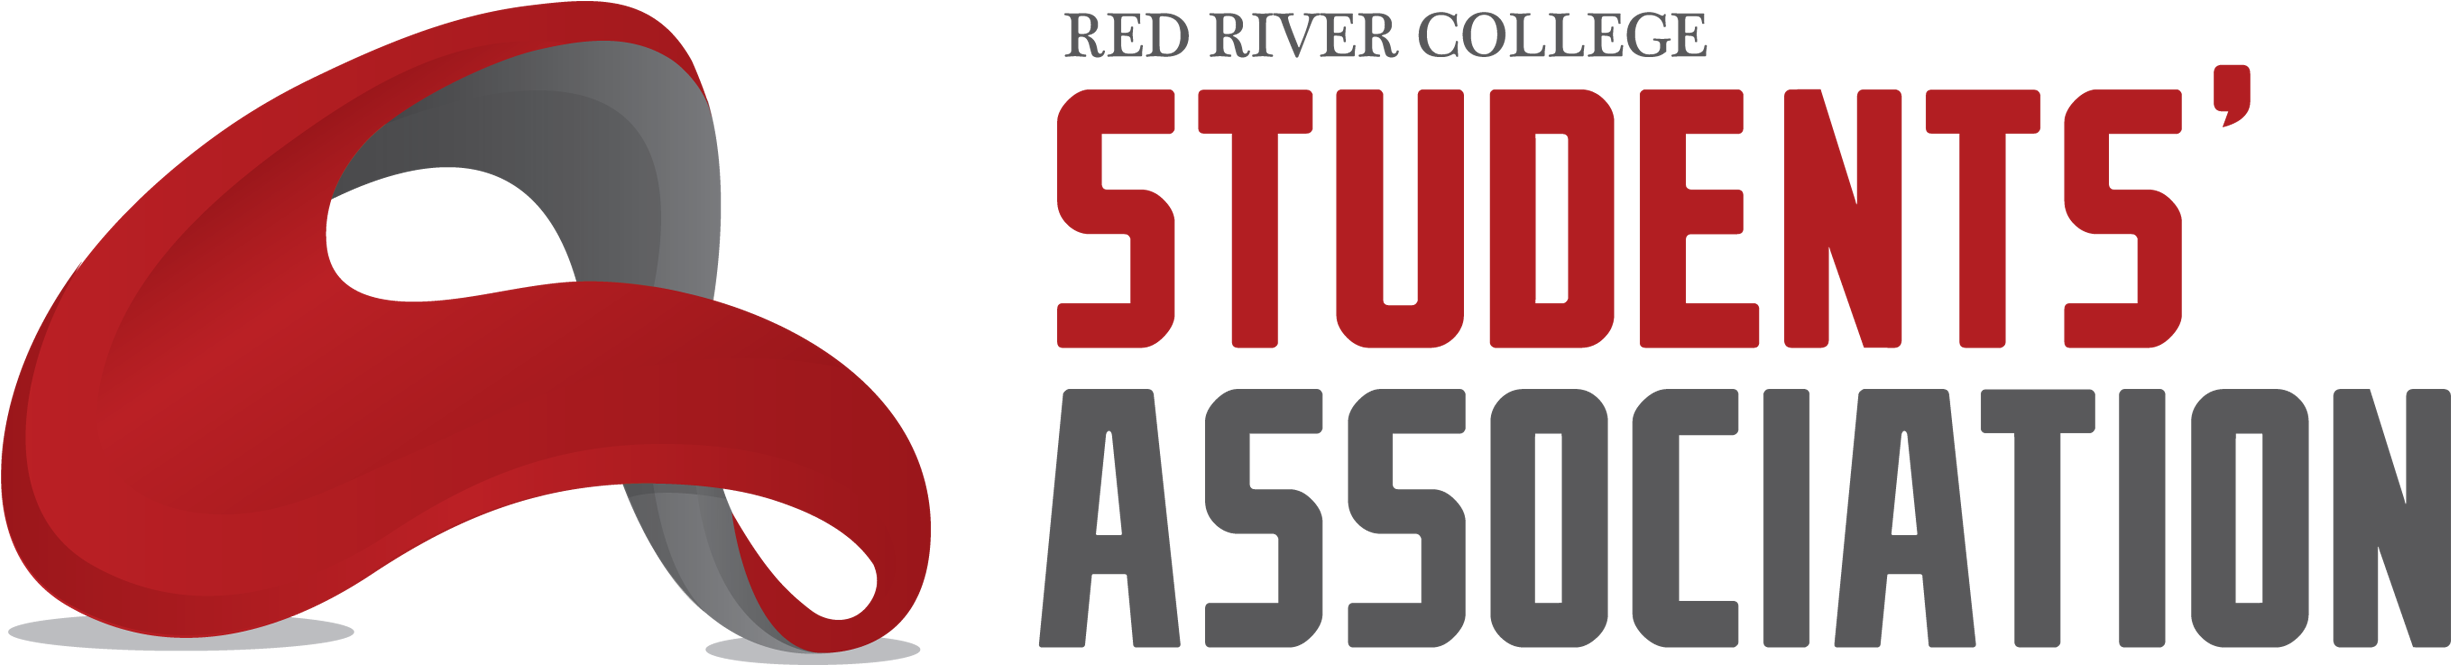 Meet Your 2016 / 2017 Executive - Red River College Student Association (2550x1008)